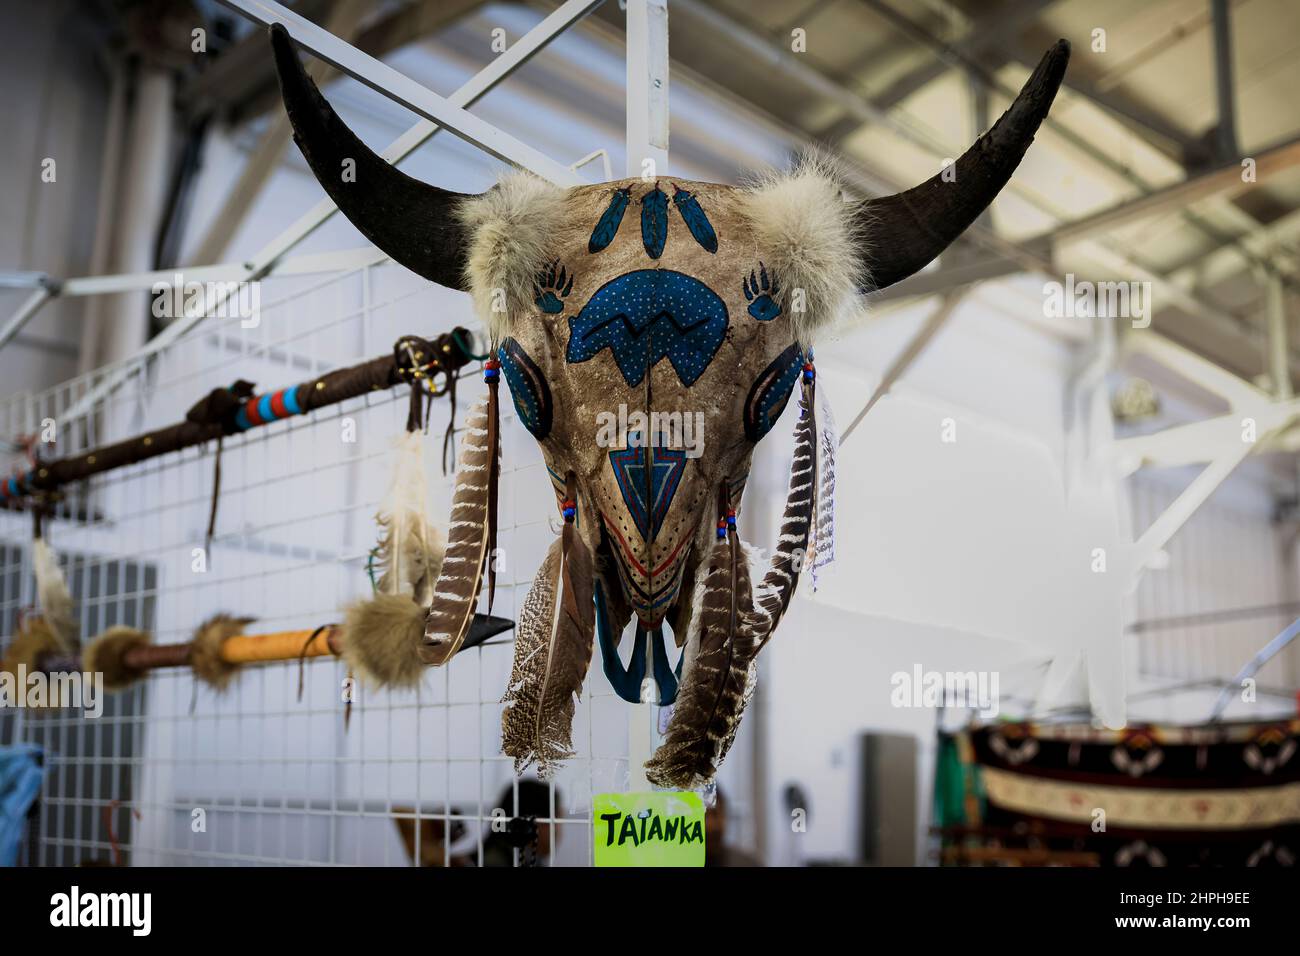 Native American Indian regalia, bison or tatanka skull decorated with painted symbols and feathers on display for sale at a powwow, San Francisco Stock Photo